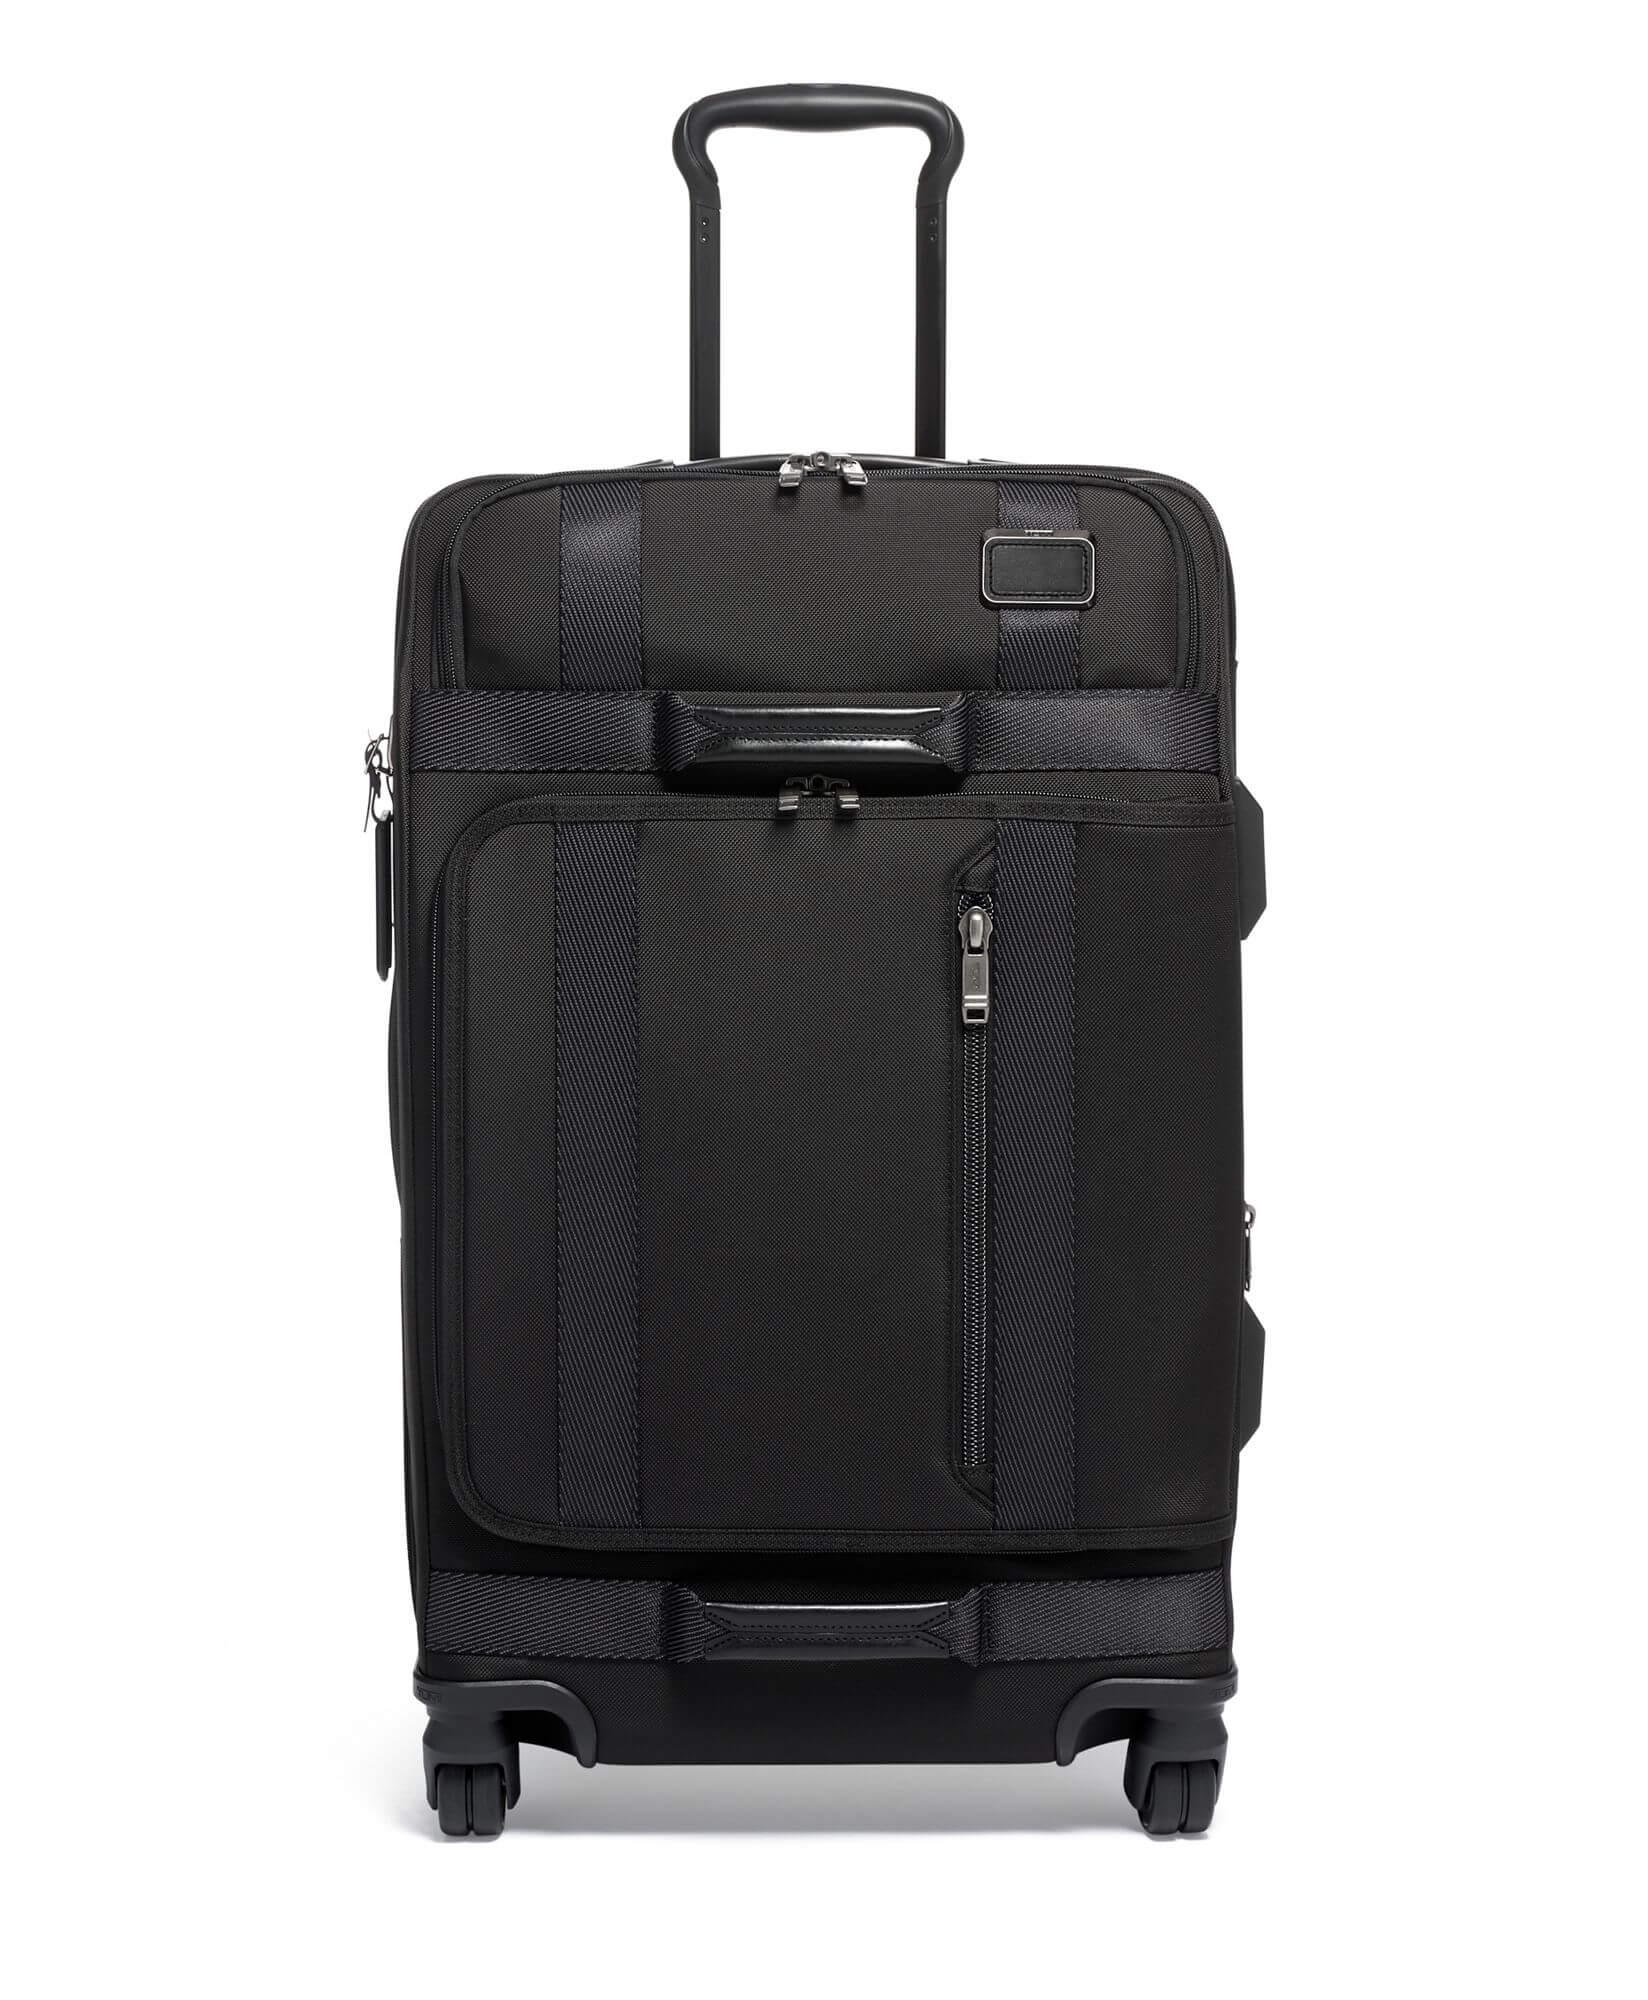 Tumi Luggage Review - The 10 Best Suitcases by Tumi